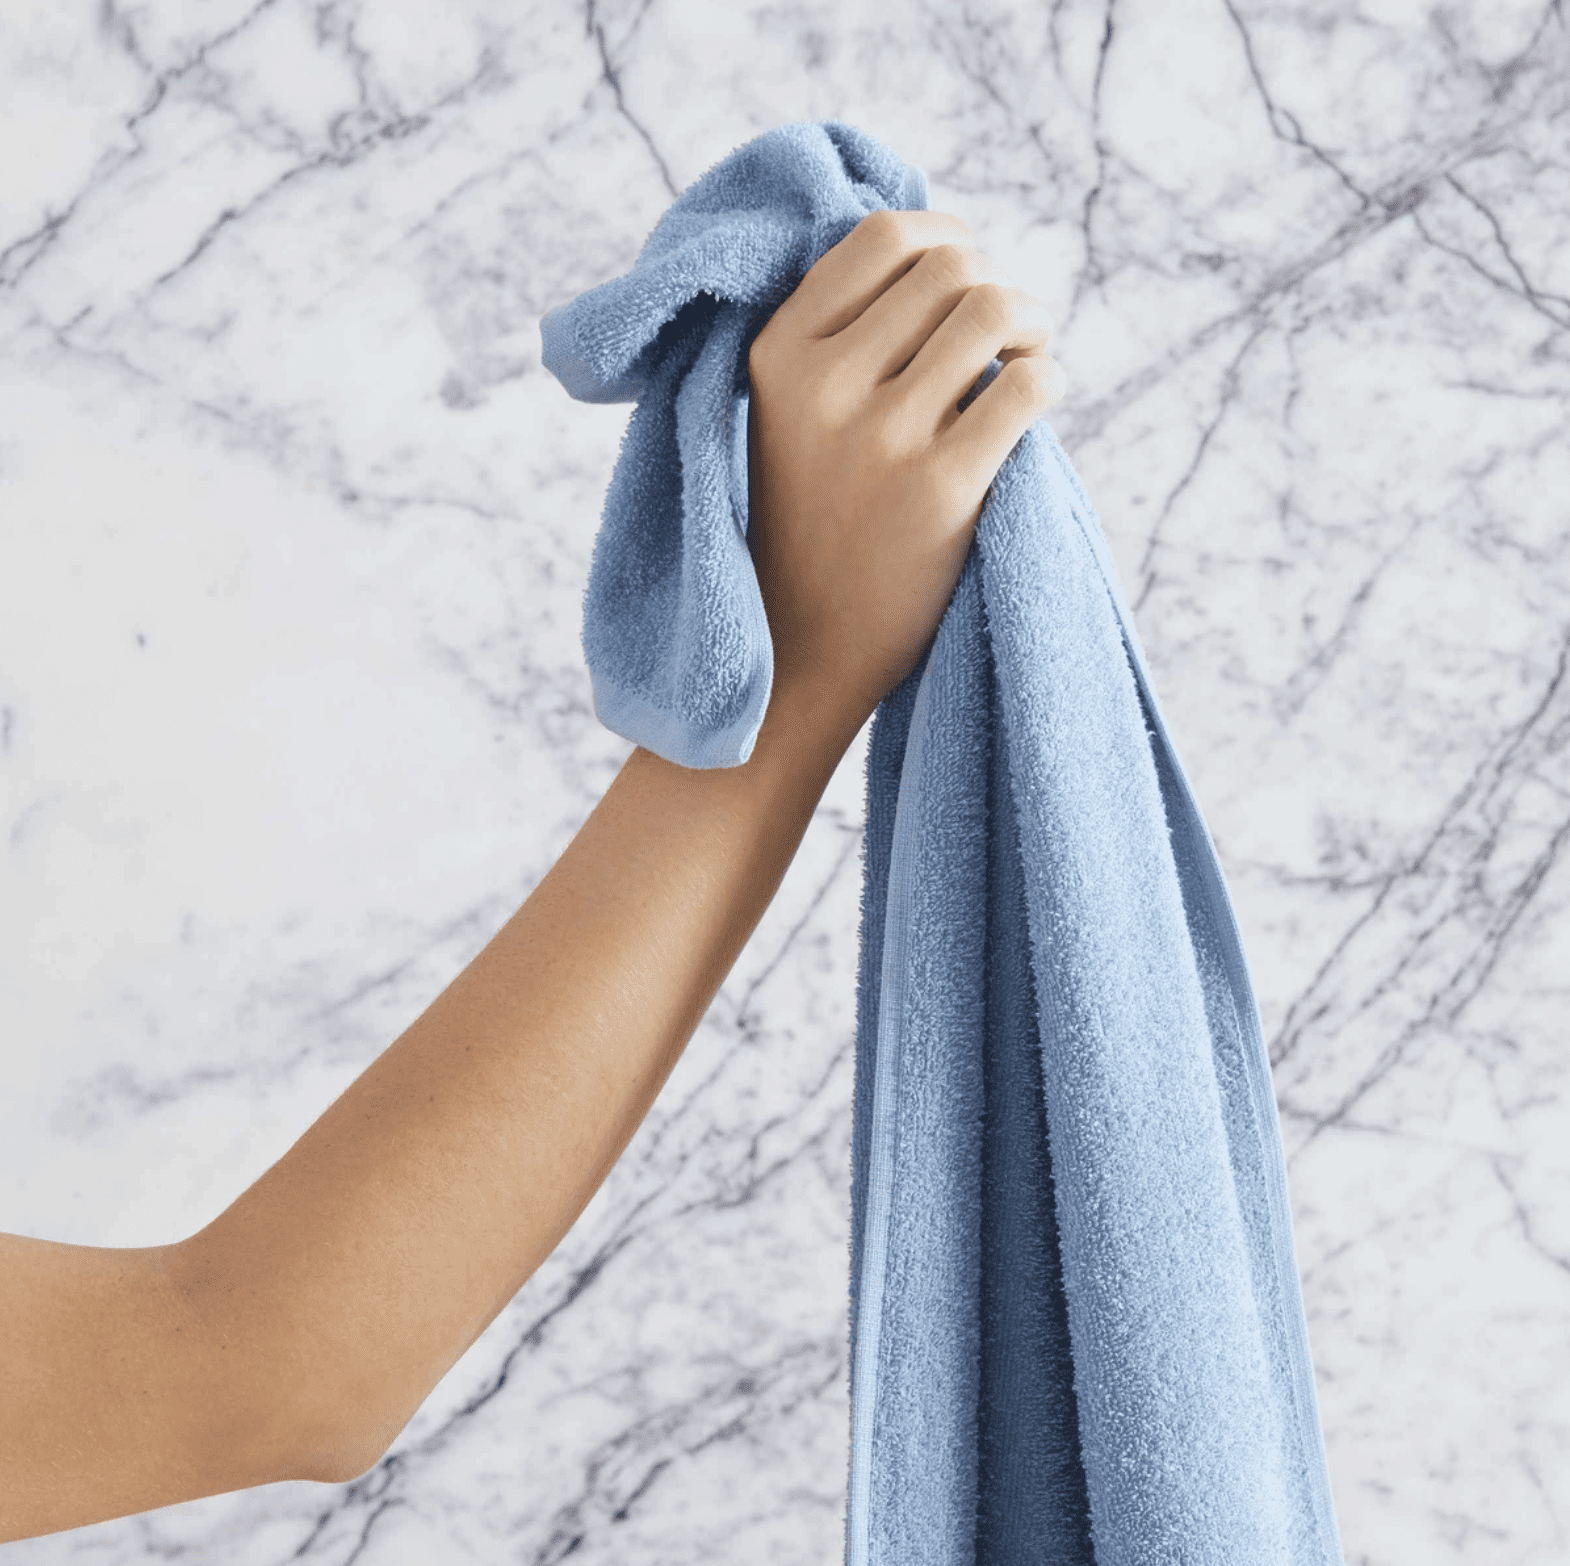 Is Air-Drying Better Than Towel-Drying After Cleansing Your Face?